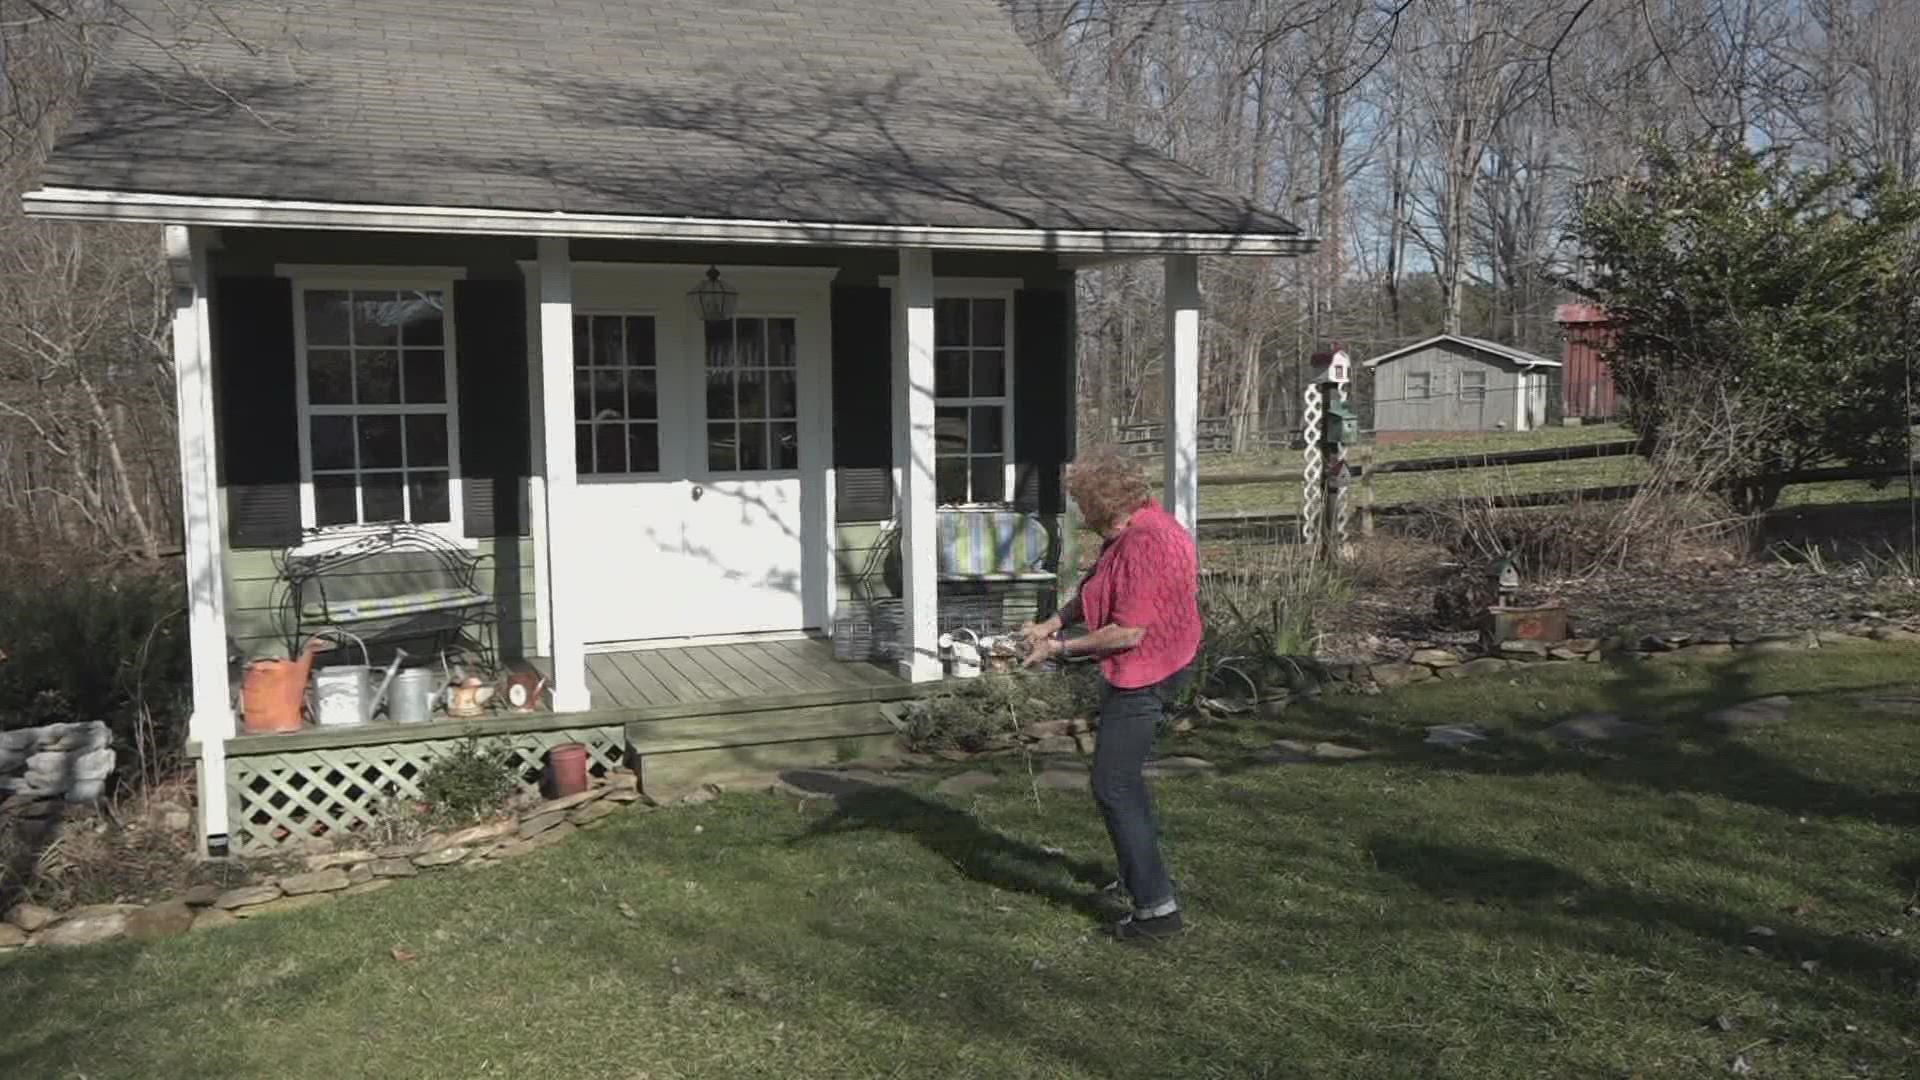 She needed some work done on her decades-old home and paid the handyman up front, but he never completed the job and didn't answer her phone calls.